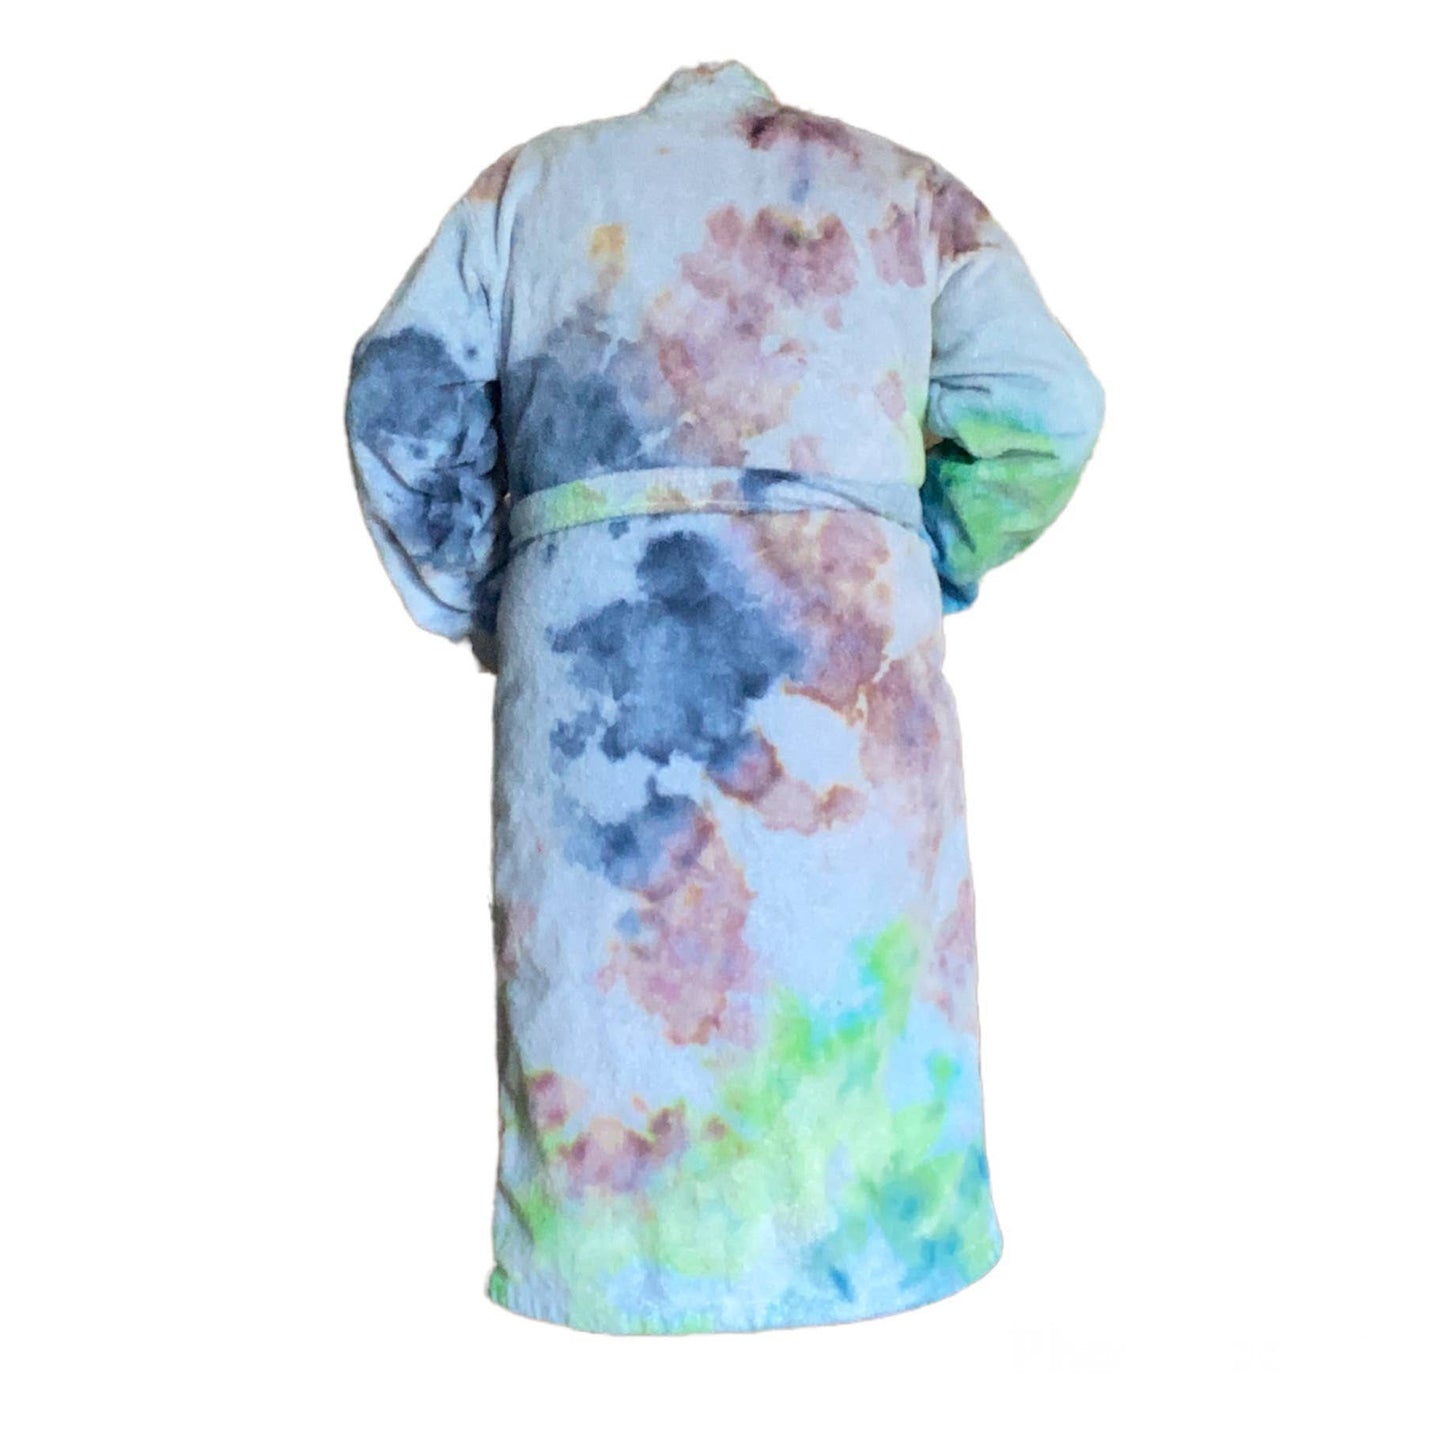 Made By Keeper Ice Dyed - 100% Cotton Terry Bath Robe